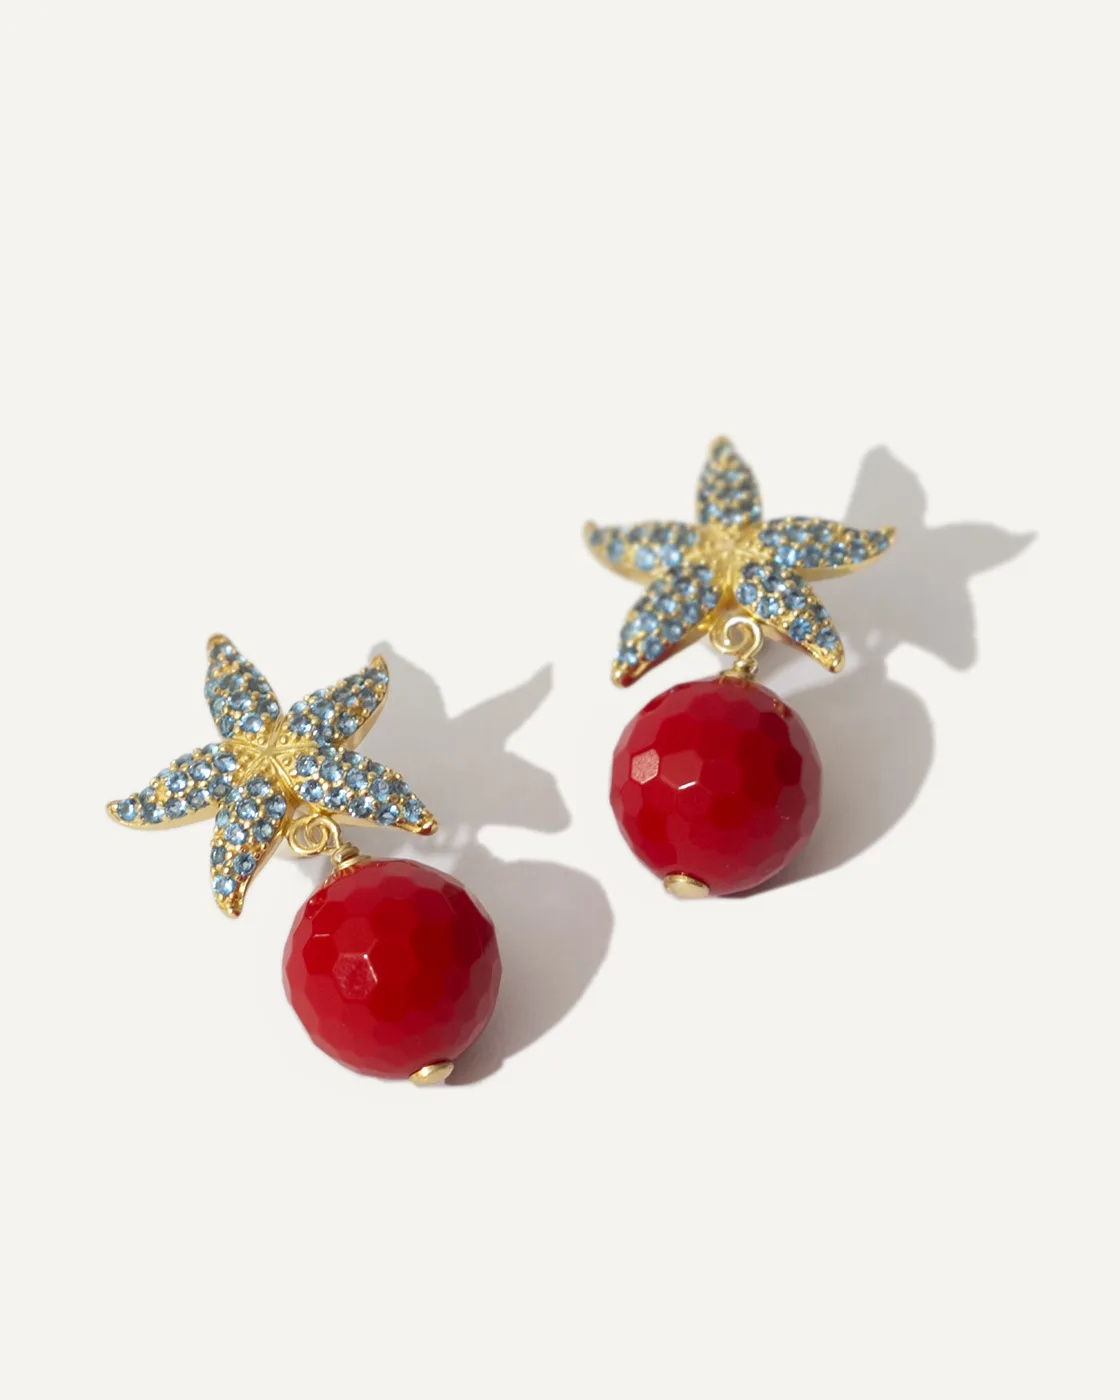 Krill Starfish Silver Earrings with Red Agate Drops